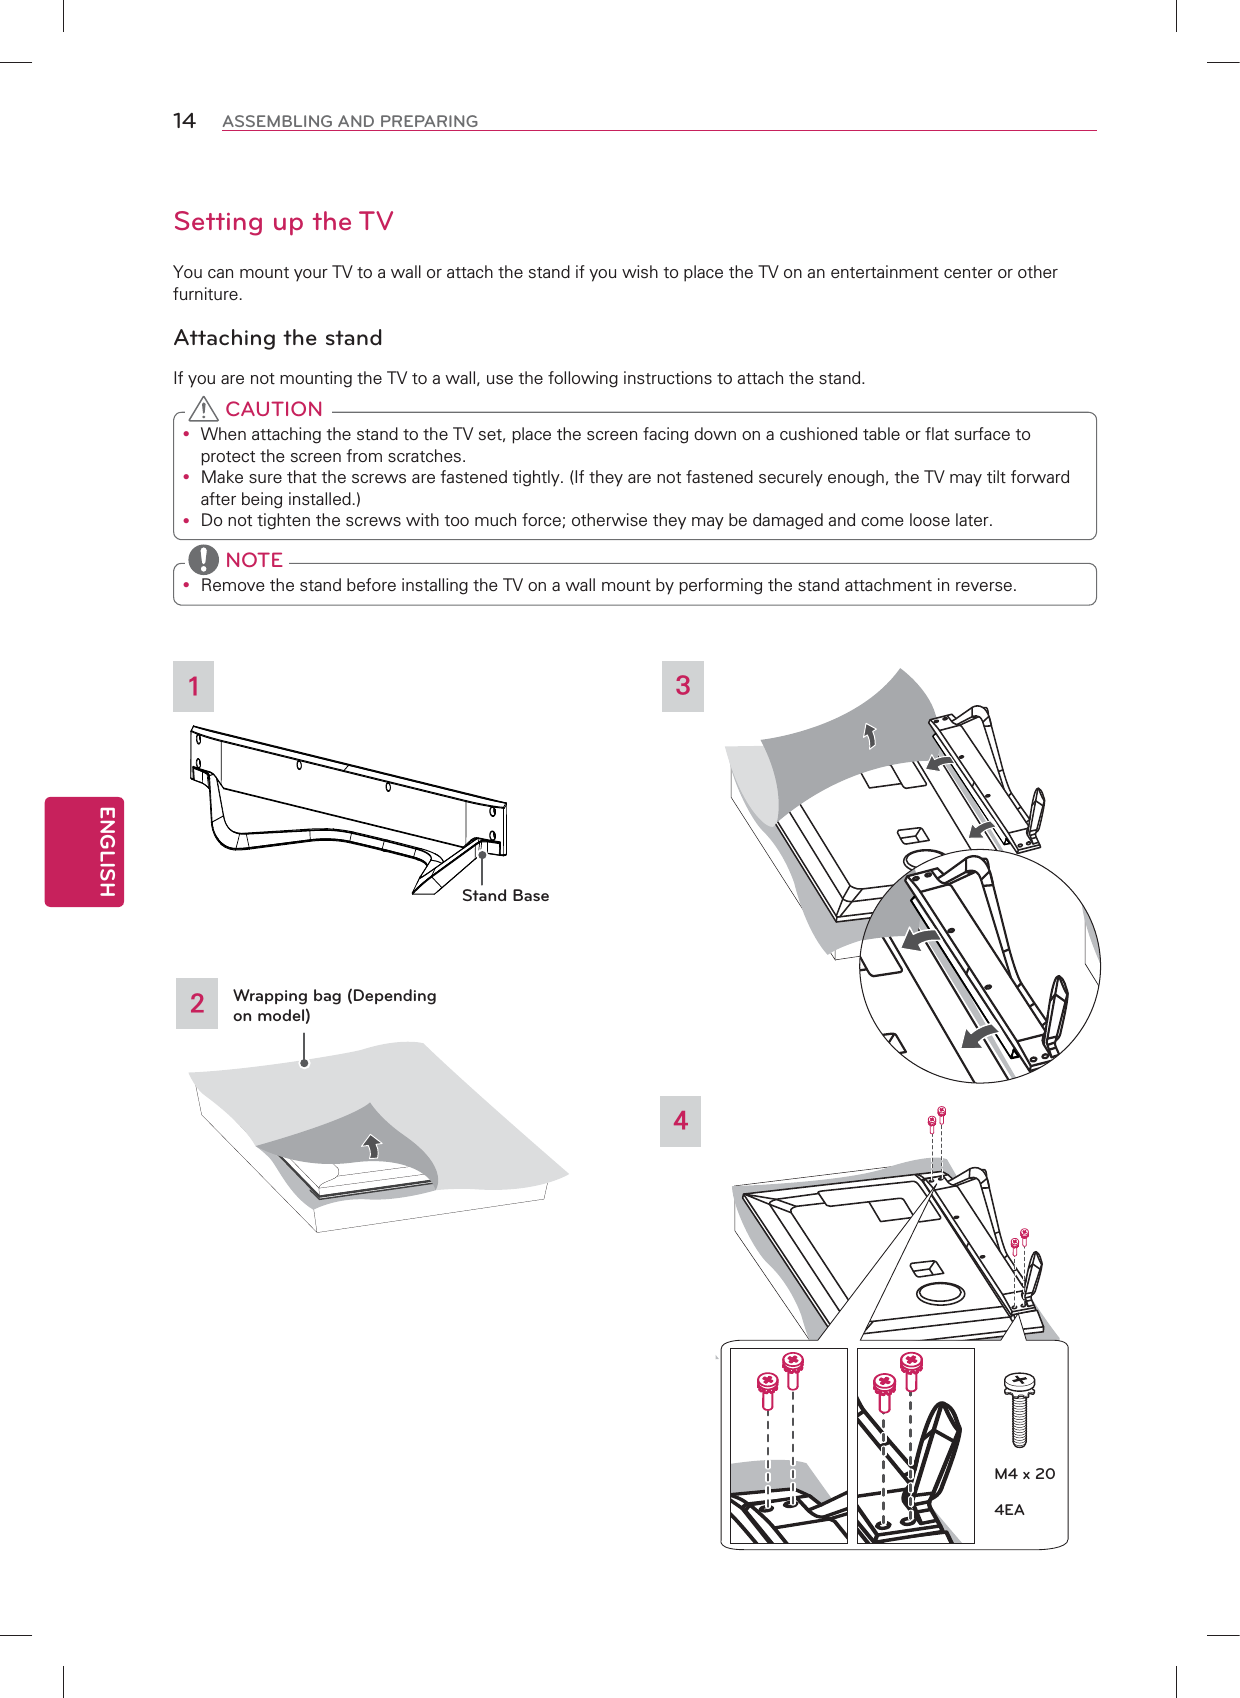 ENGLISH14 ASSEMBLING AND PREPARINGSetting up the TVYou can mount your TV to a wall or attach the stand if you wish to place the TV on an entertainment center or otherfurniture.Attaching the standIf you are not mounting the TV to a wall, use the following instructions to attach the stand.y When attaching the stand to the TV set, place the screen facing down on a cushioned table or flat surface to protect the screen from scratches.y Make sure that the screws are fastened tightly. (If they are not fastened securely enough, the TV may tilt forward after being installed.)y Do not tighten the screws with too much force; otherwise they may be damaged and come loose later. CAUTIONy Remove the stand before installing the TV on a wall mount by performing the stand attachment in reverse. NOTE324Wrapping bag (Depending on model)1Stand BaseM4 x 204EA